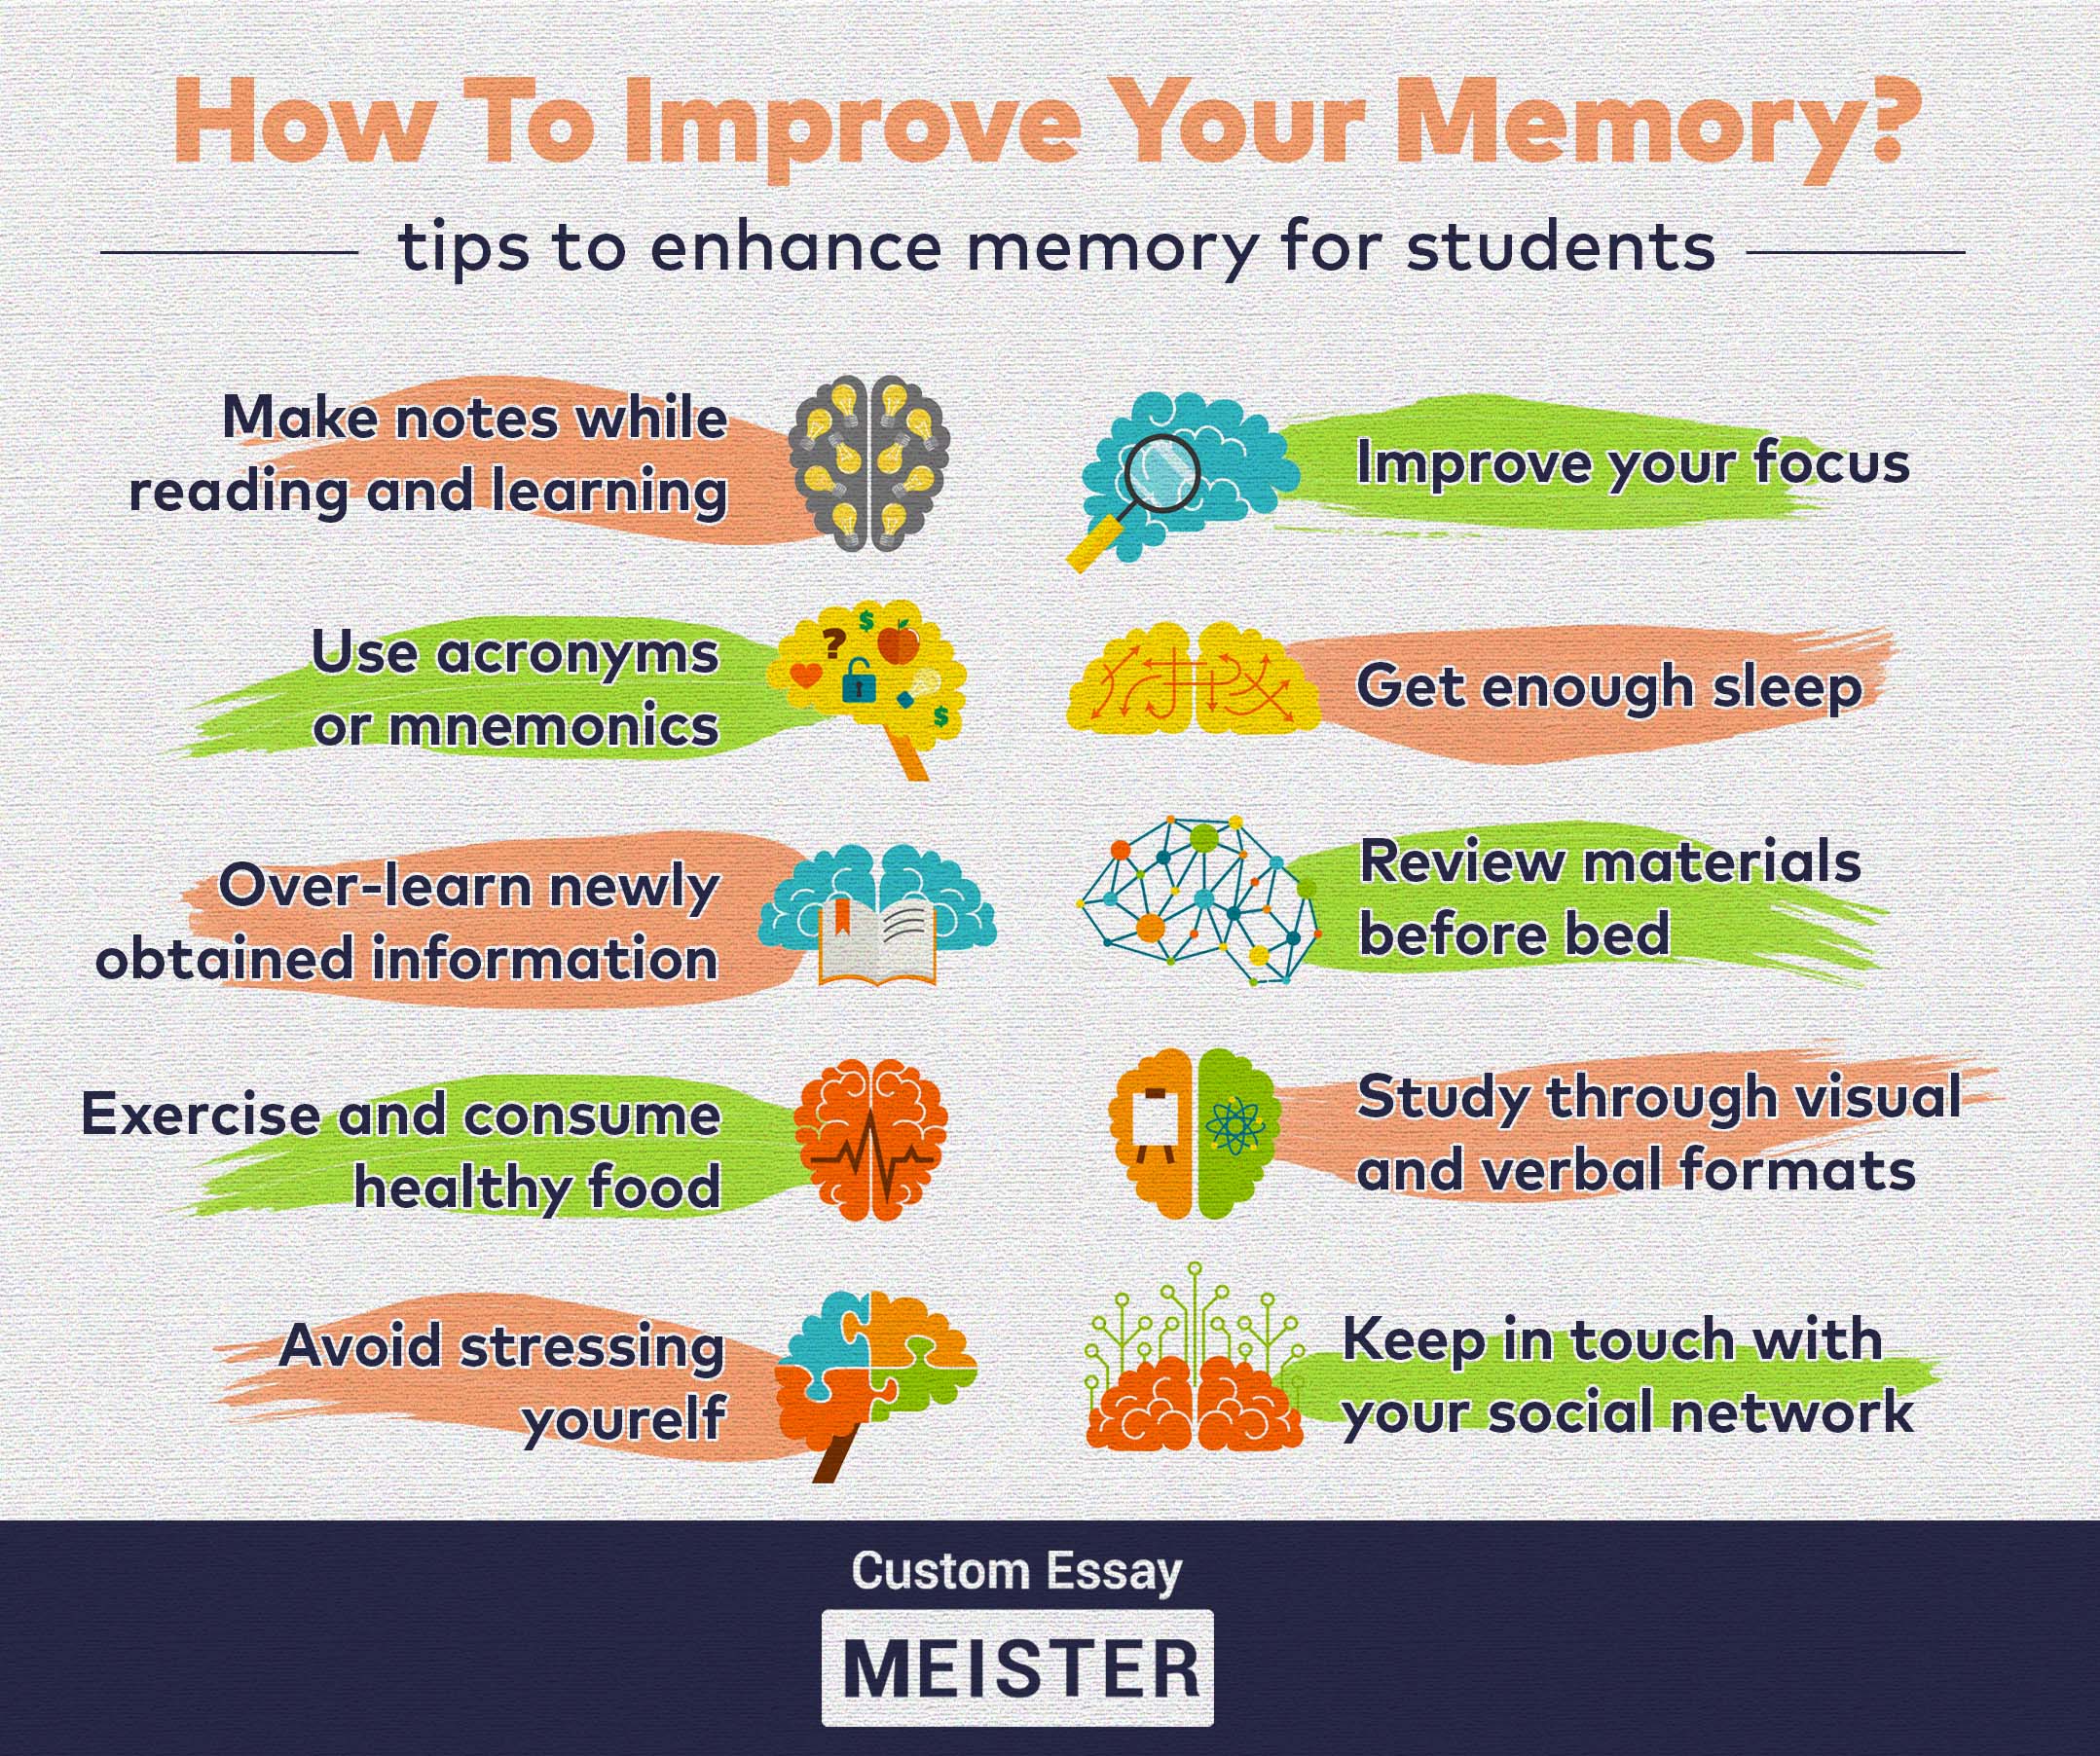 does homework help with memory